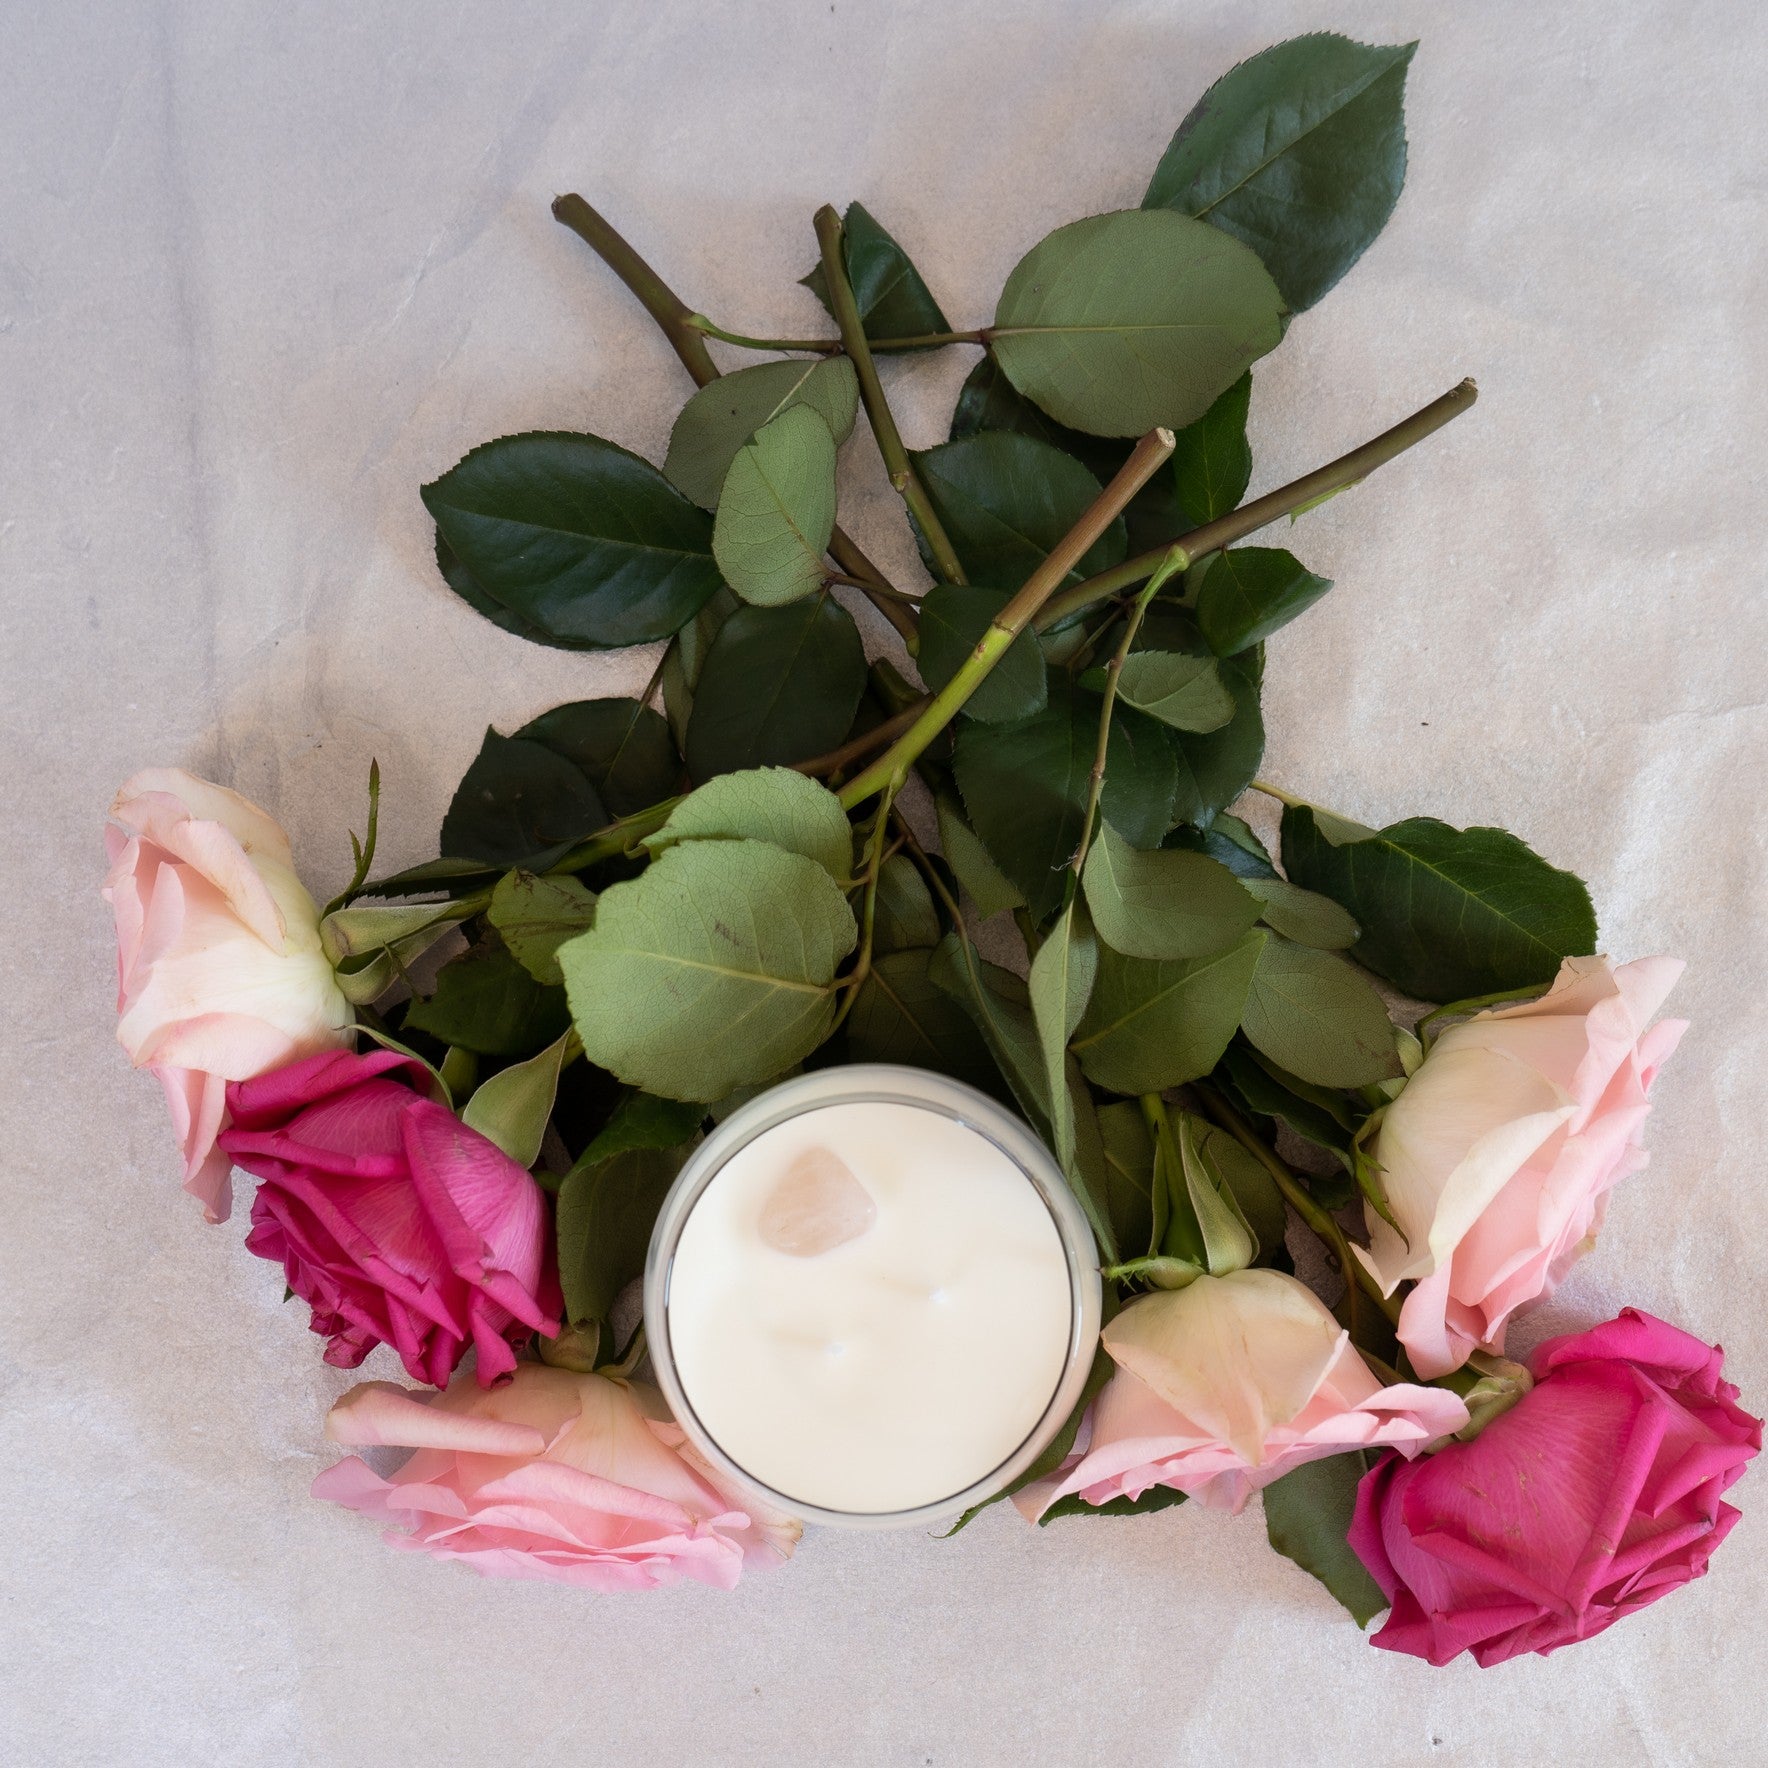 Arve Love Candle, Scent: Pink Champagne, 7.0 oz 100% Soy Wax, Glass Container, Rose Quartz Crystal & Pink Flowers. Aromatherapy, Meditation. Healing